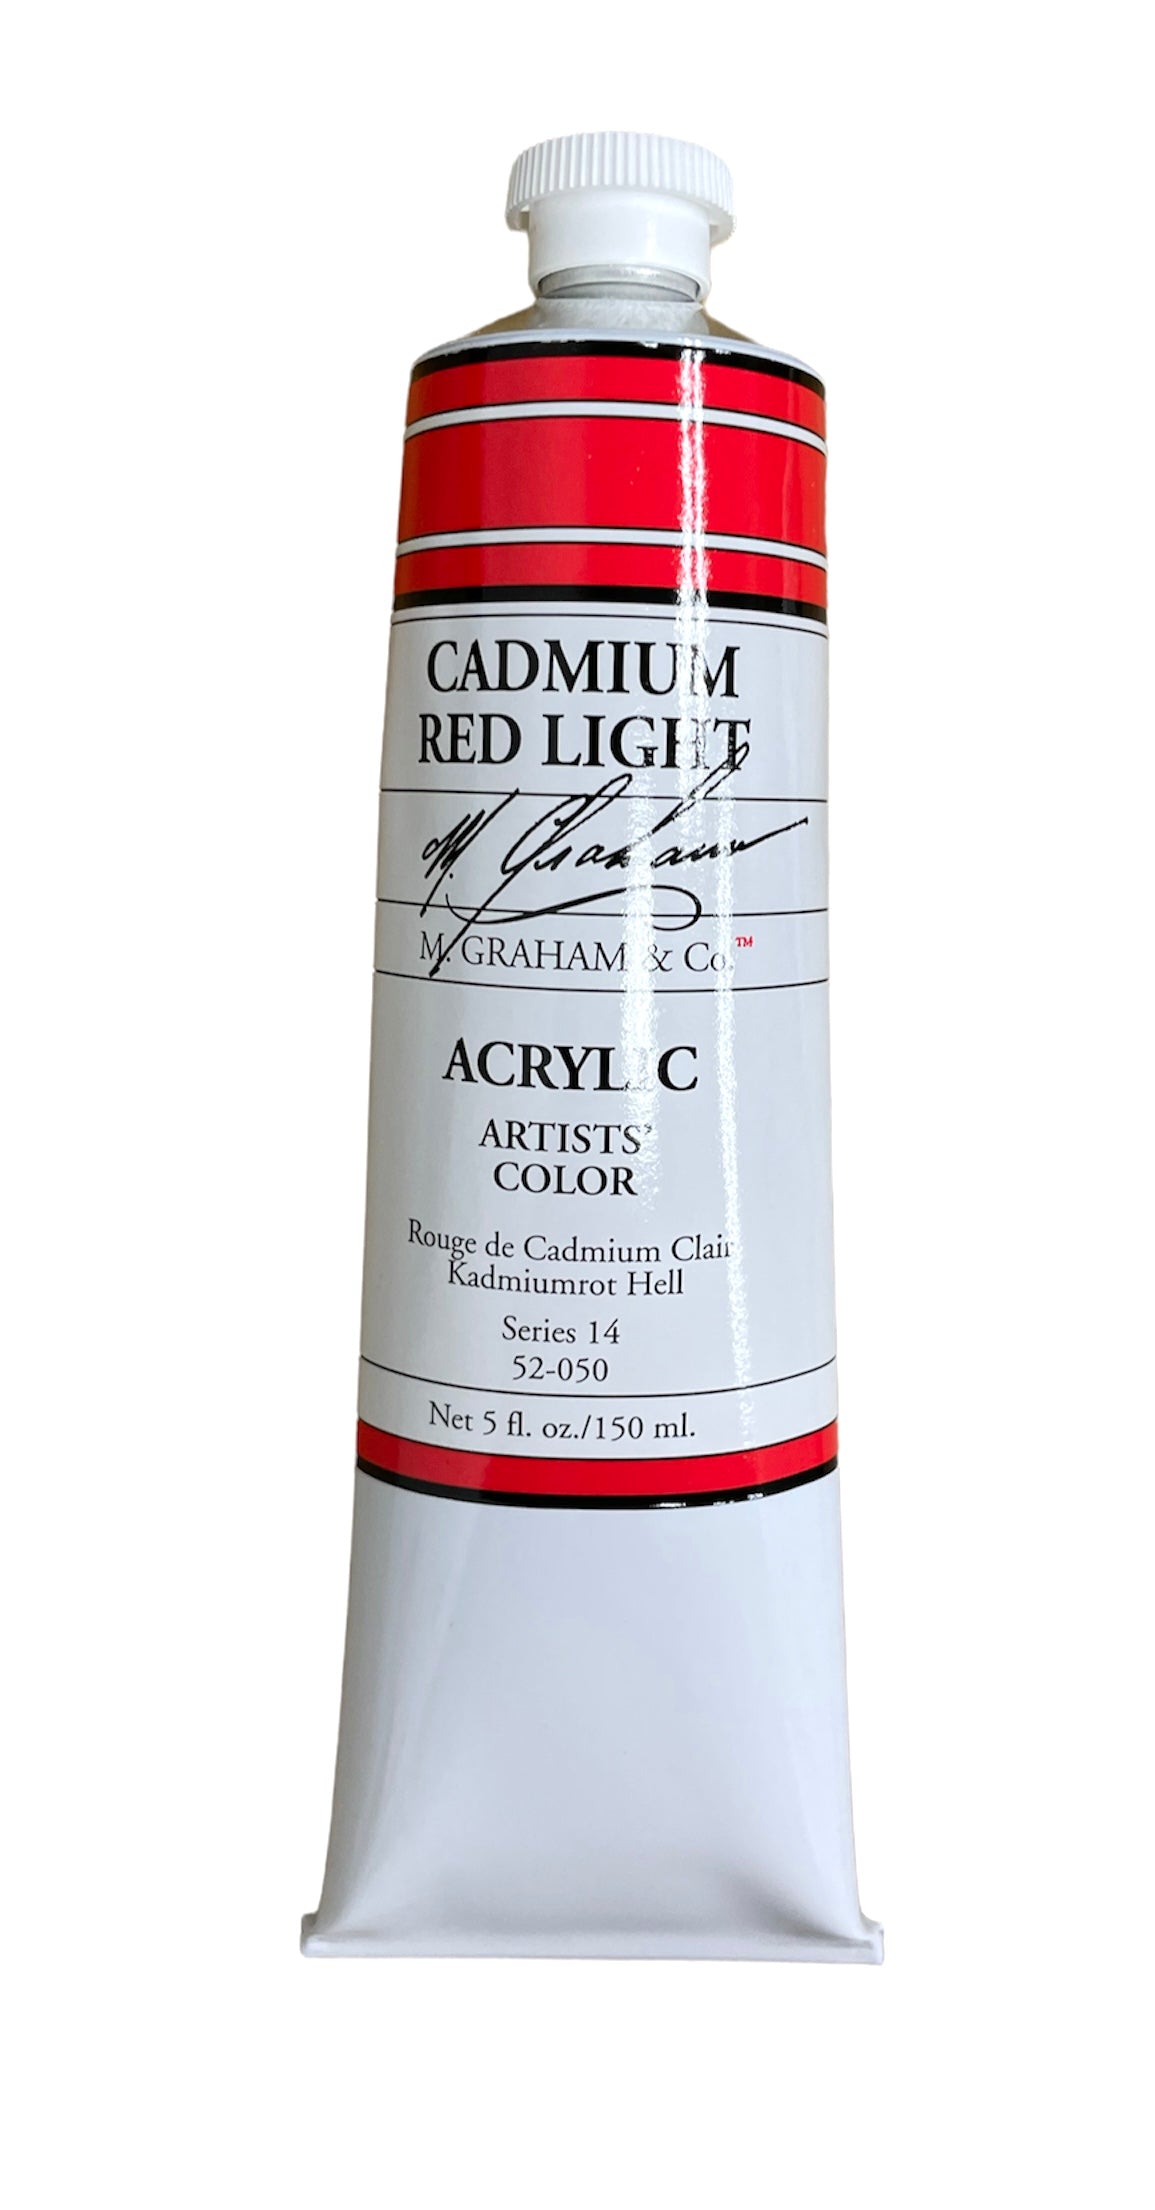 M. Graham Acrylic Cadmium Red Light in 150ml. Available in Drawing Etc. Art Supplies store, Singapore